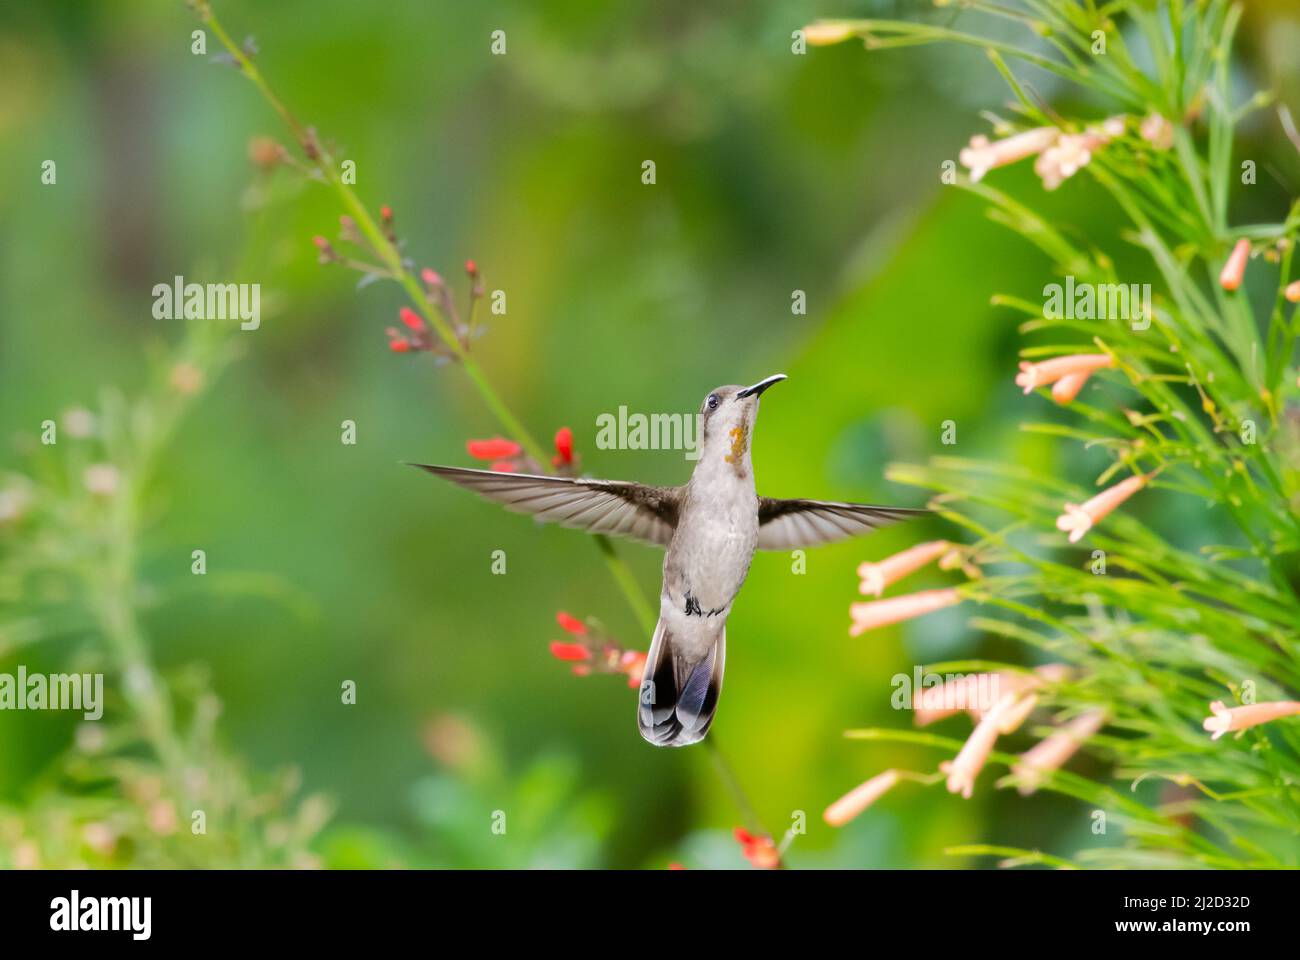 Dreamy scene of a female Ruby Topaz hummingbird, Chrysolampis mosquitus, with wings spread surrounded by vivid pastel colored flowers. Stock Photo